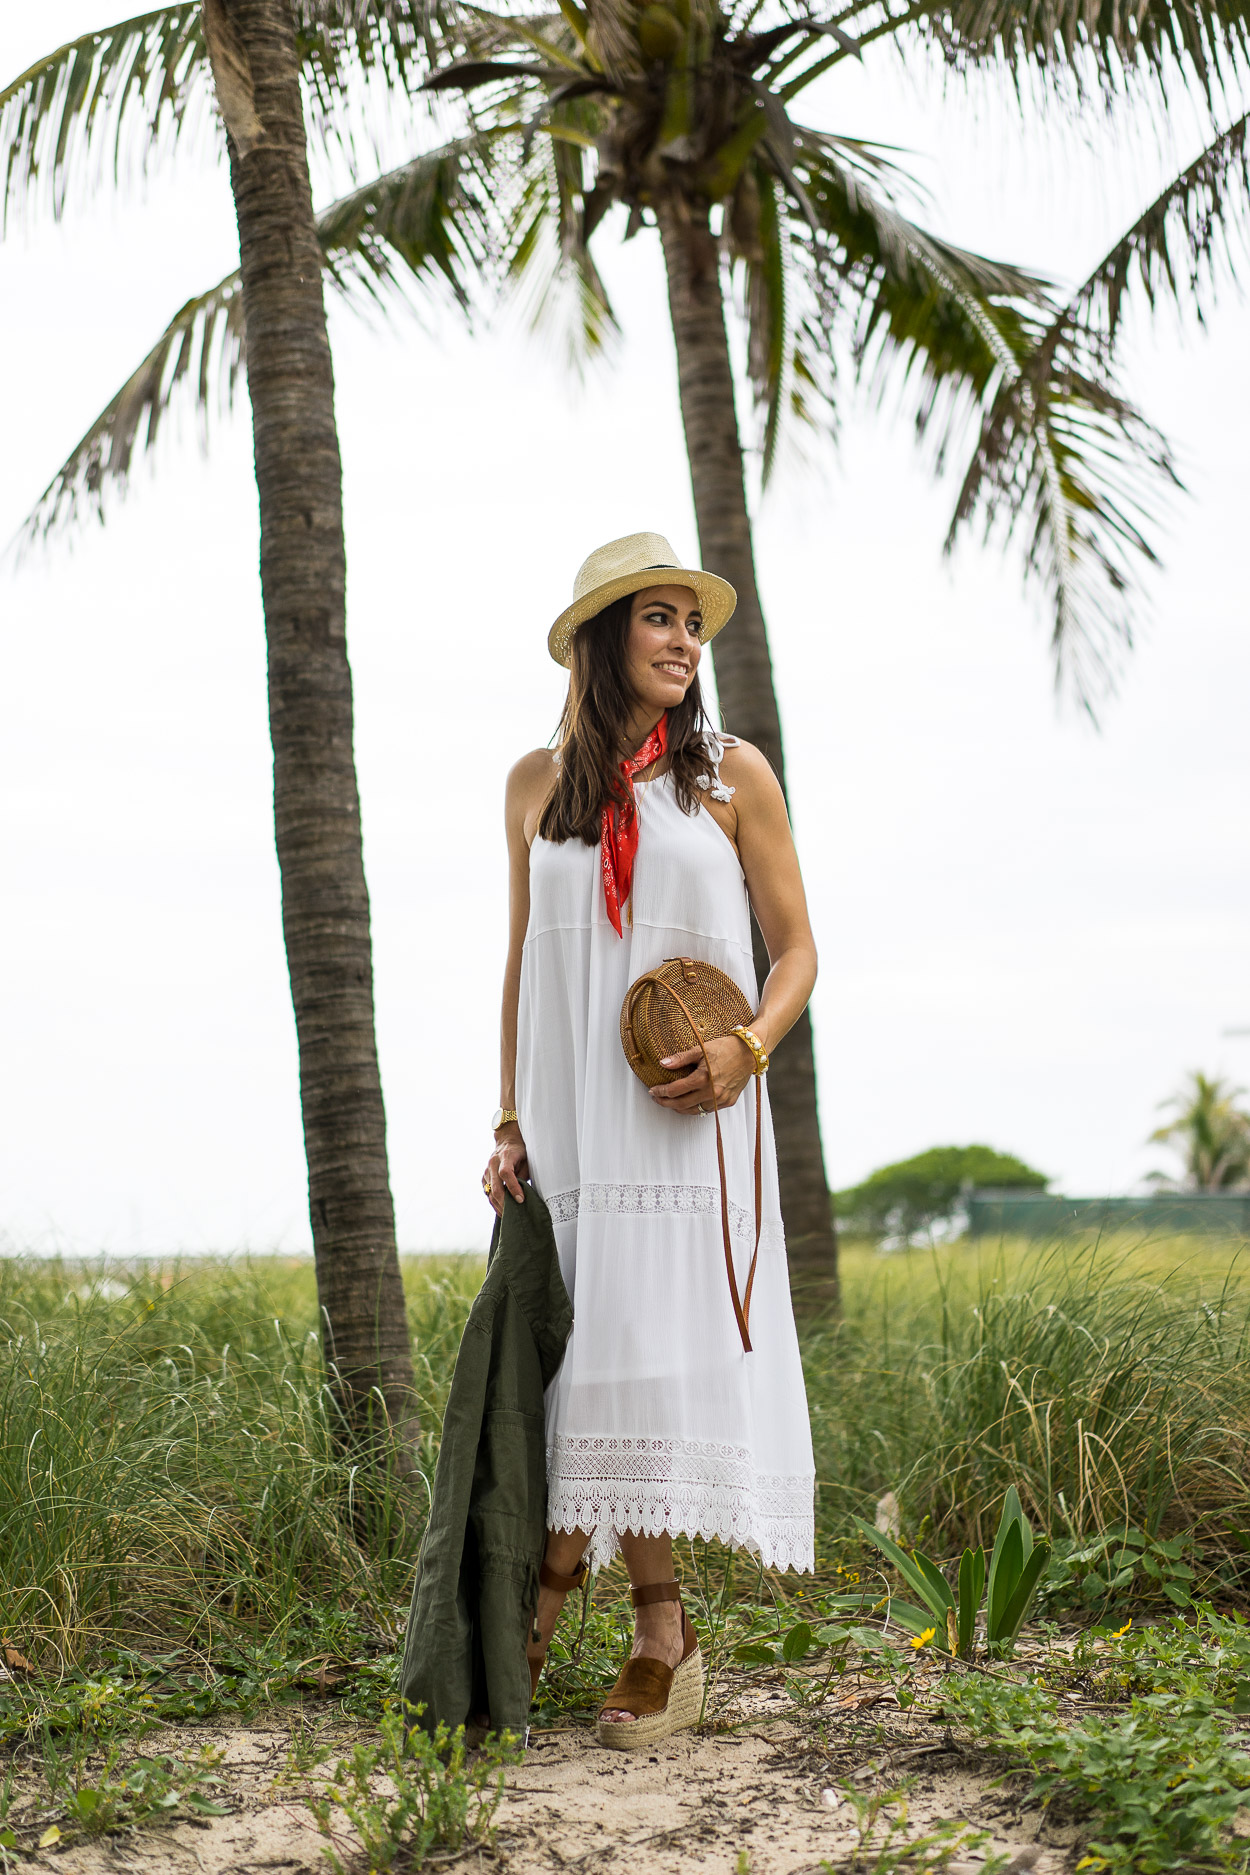 South Florida blogger Amanda shares her Old Navy summer fashion in a white crochet dress with round basket bag and green utility jacket